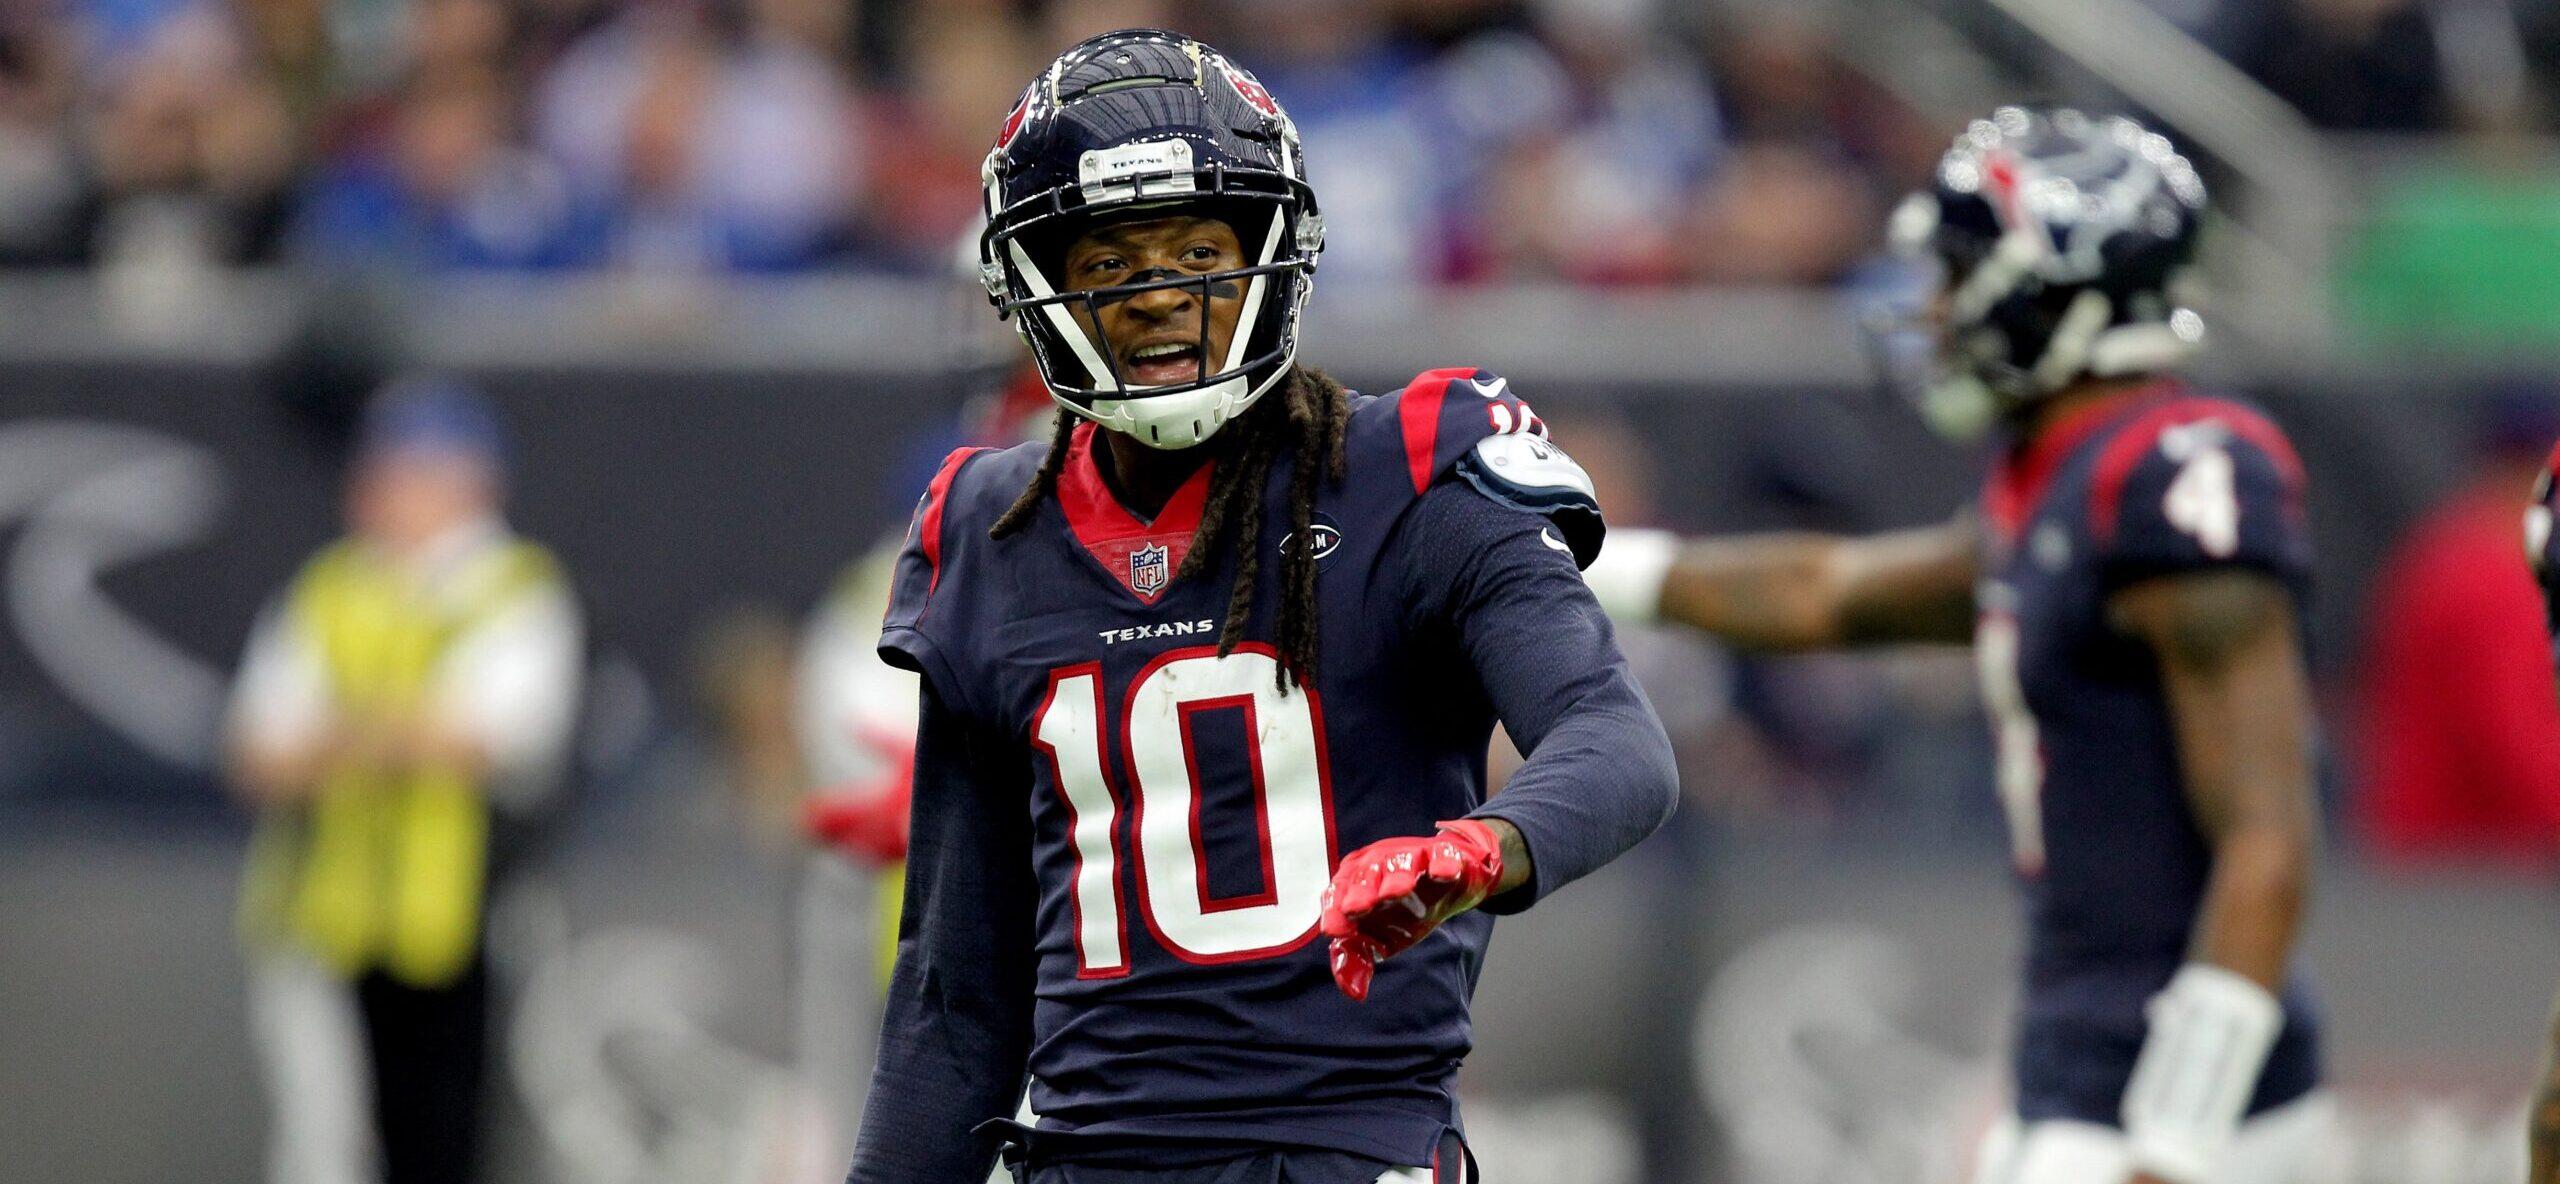 NFL Fans Say New Video Proves DeAndre Hopkins Is A ‘Bad Teammate’